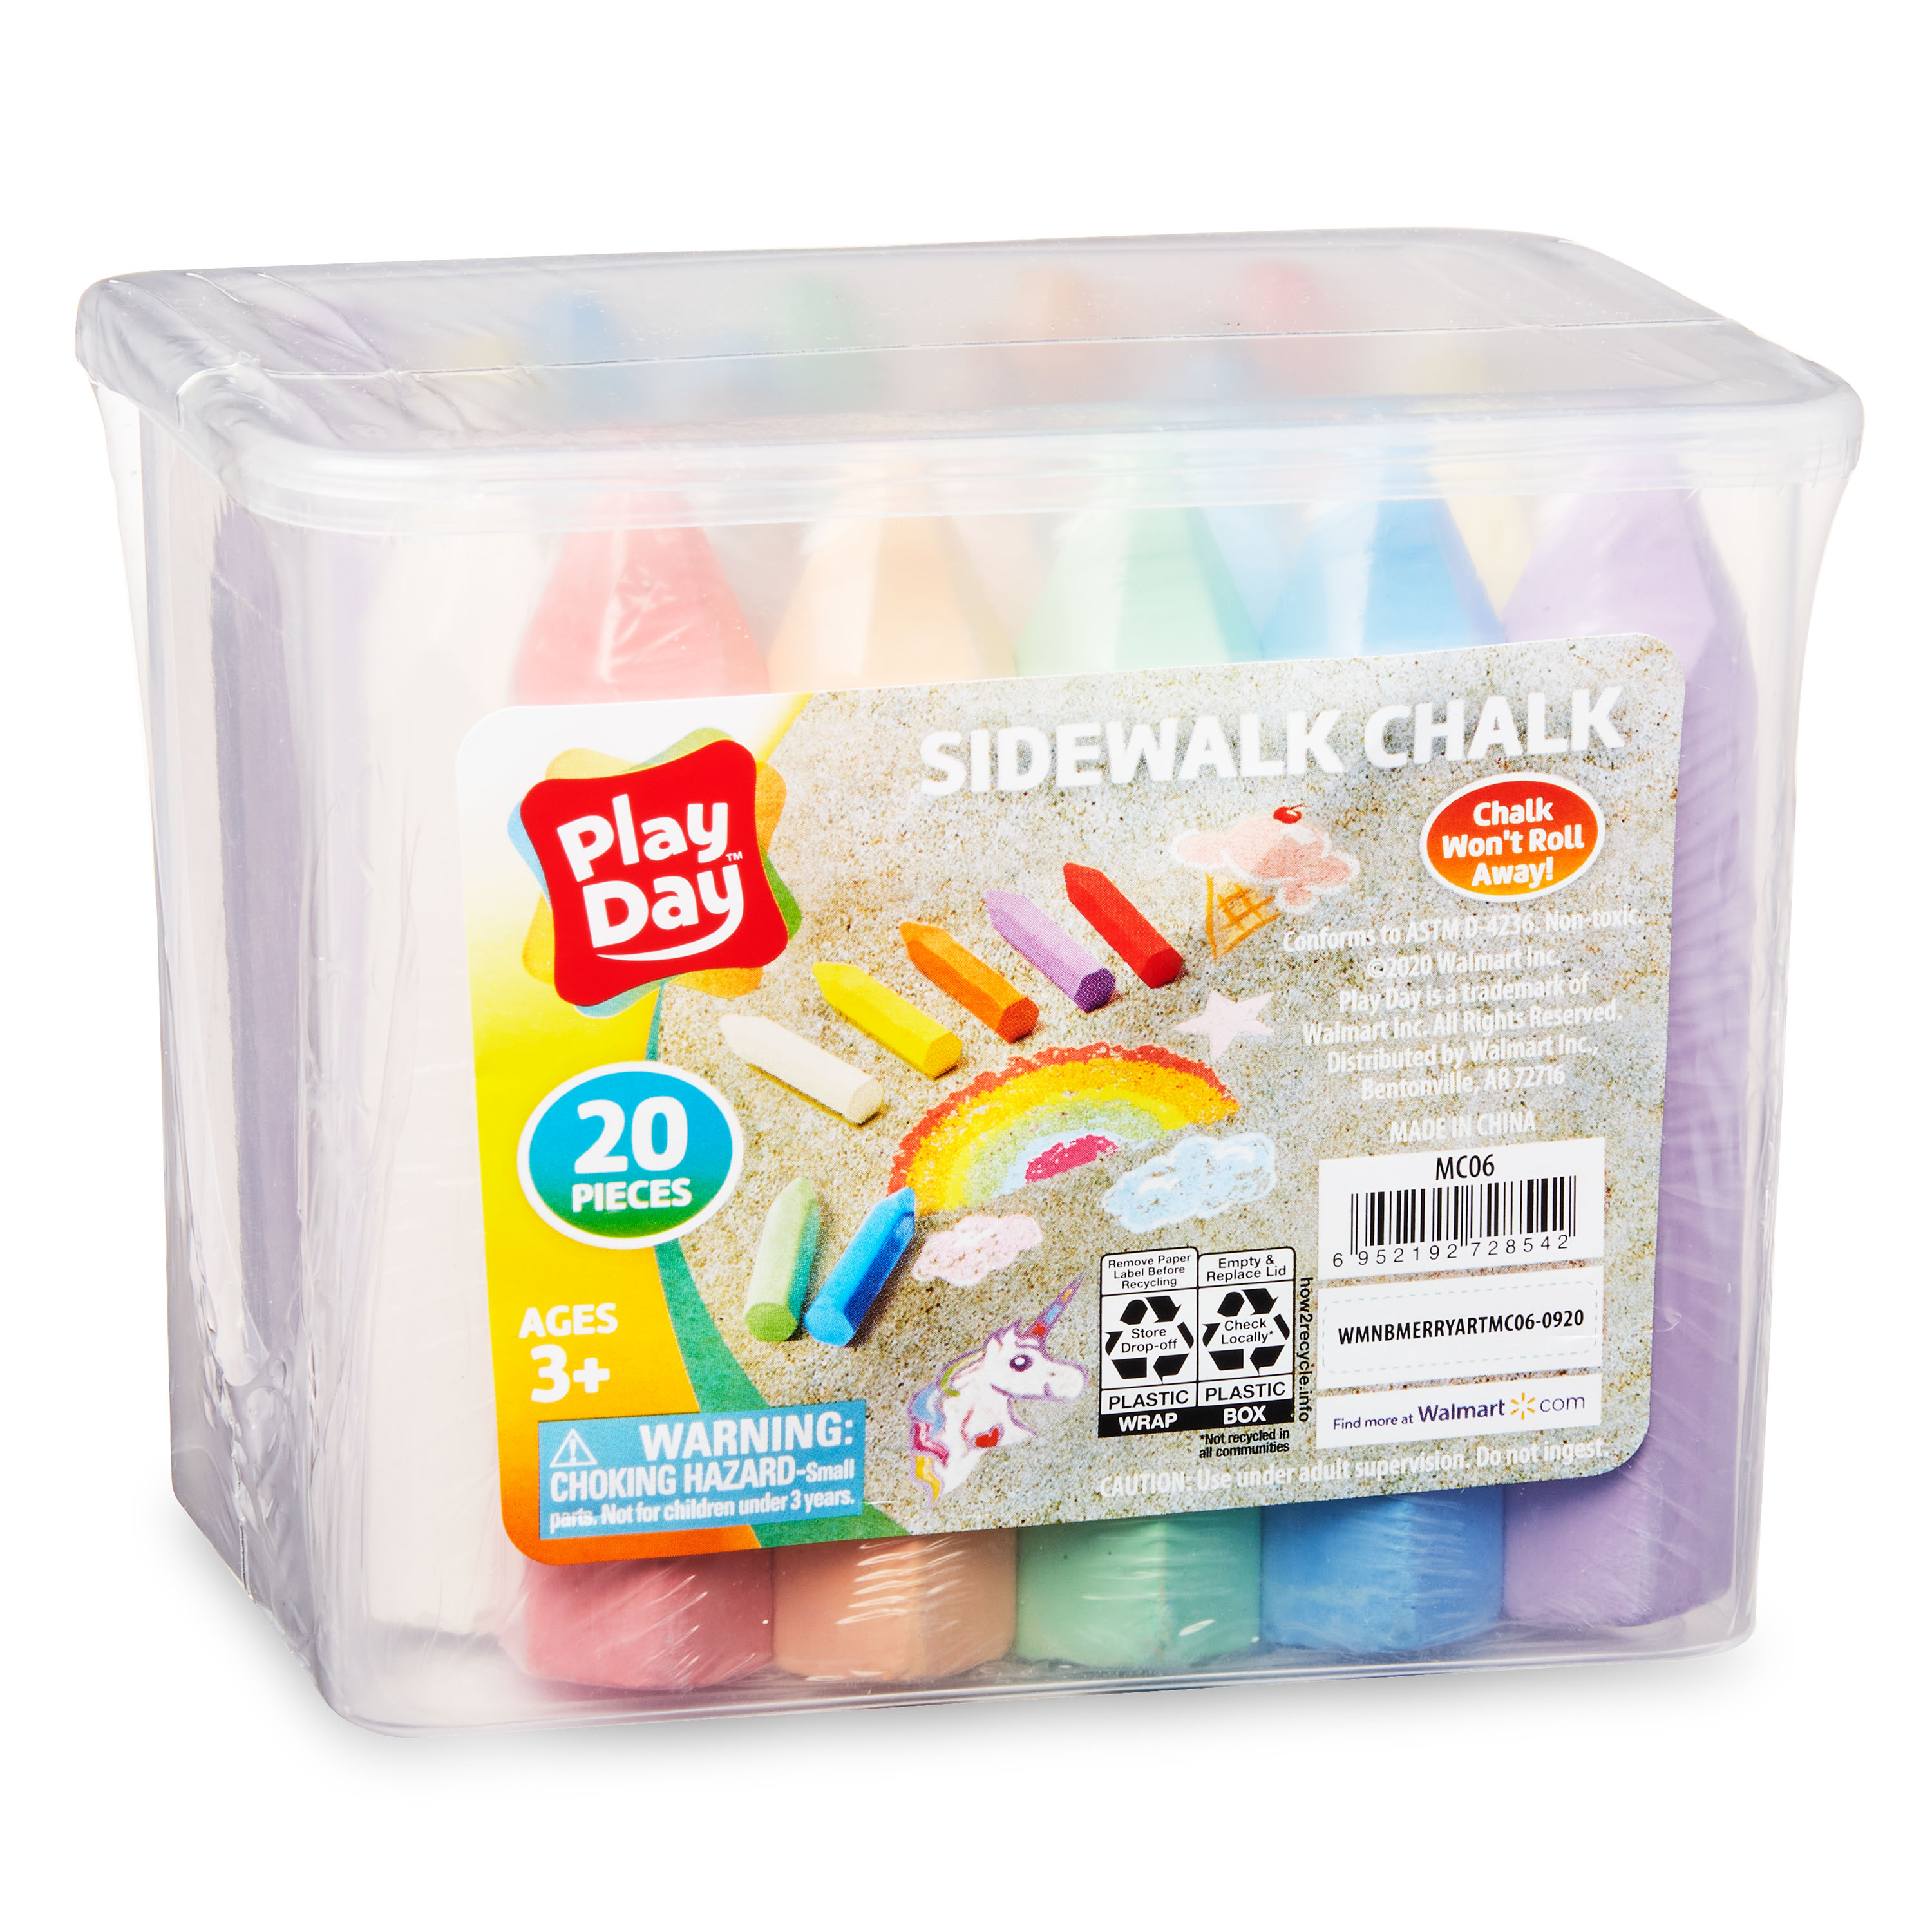 Play Day Sidewalk Chalk, 20 Pieces, Assorted Colors - image 5 of 5